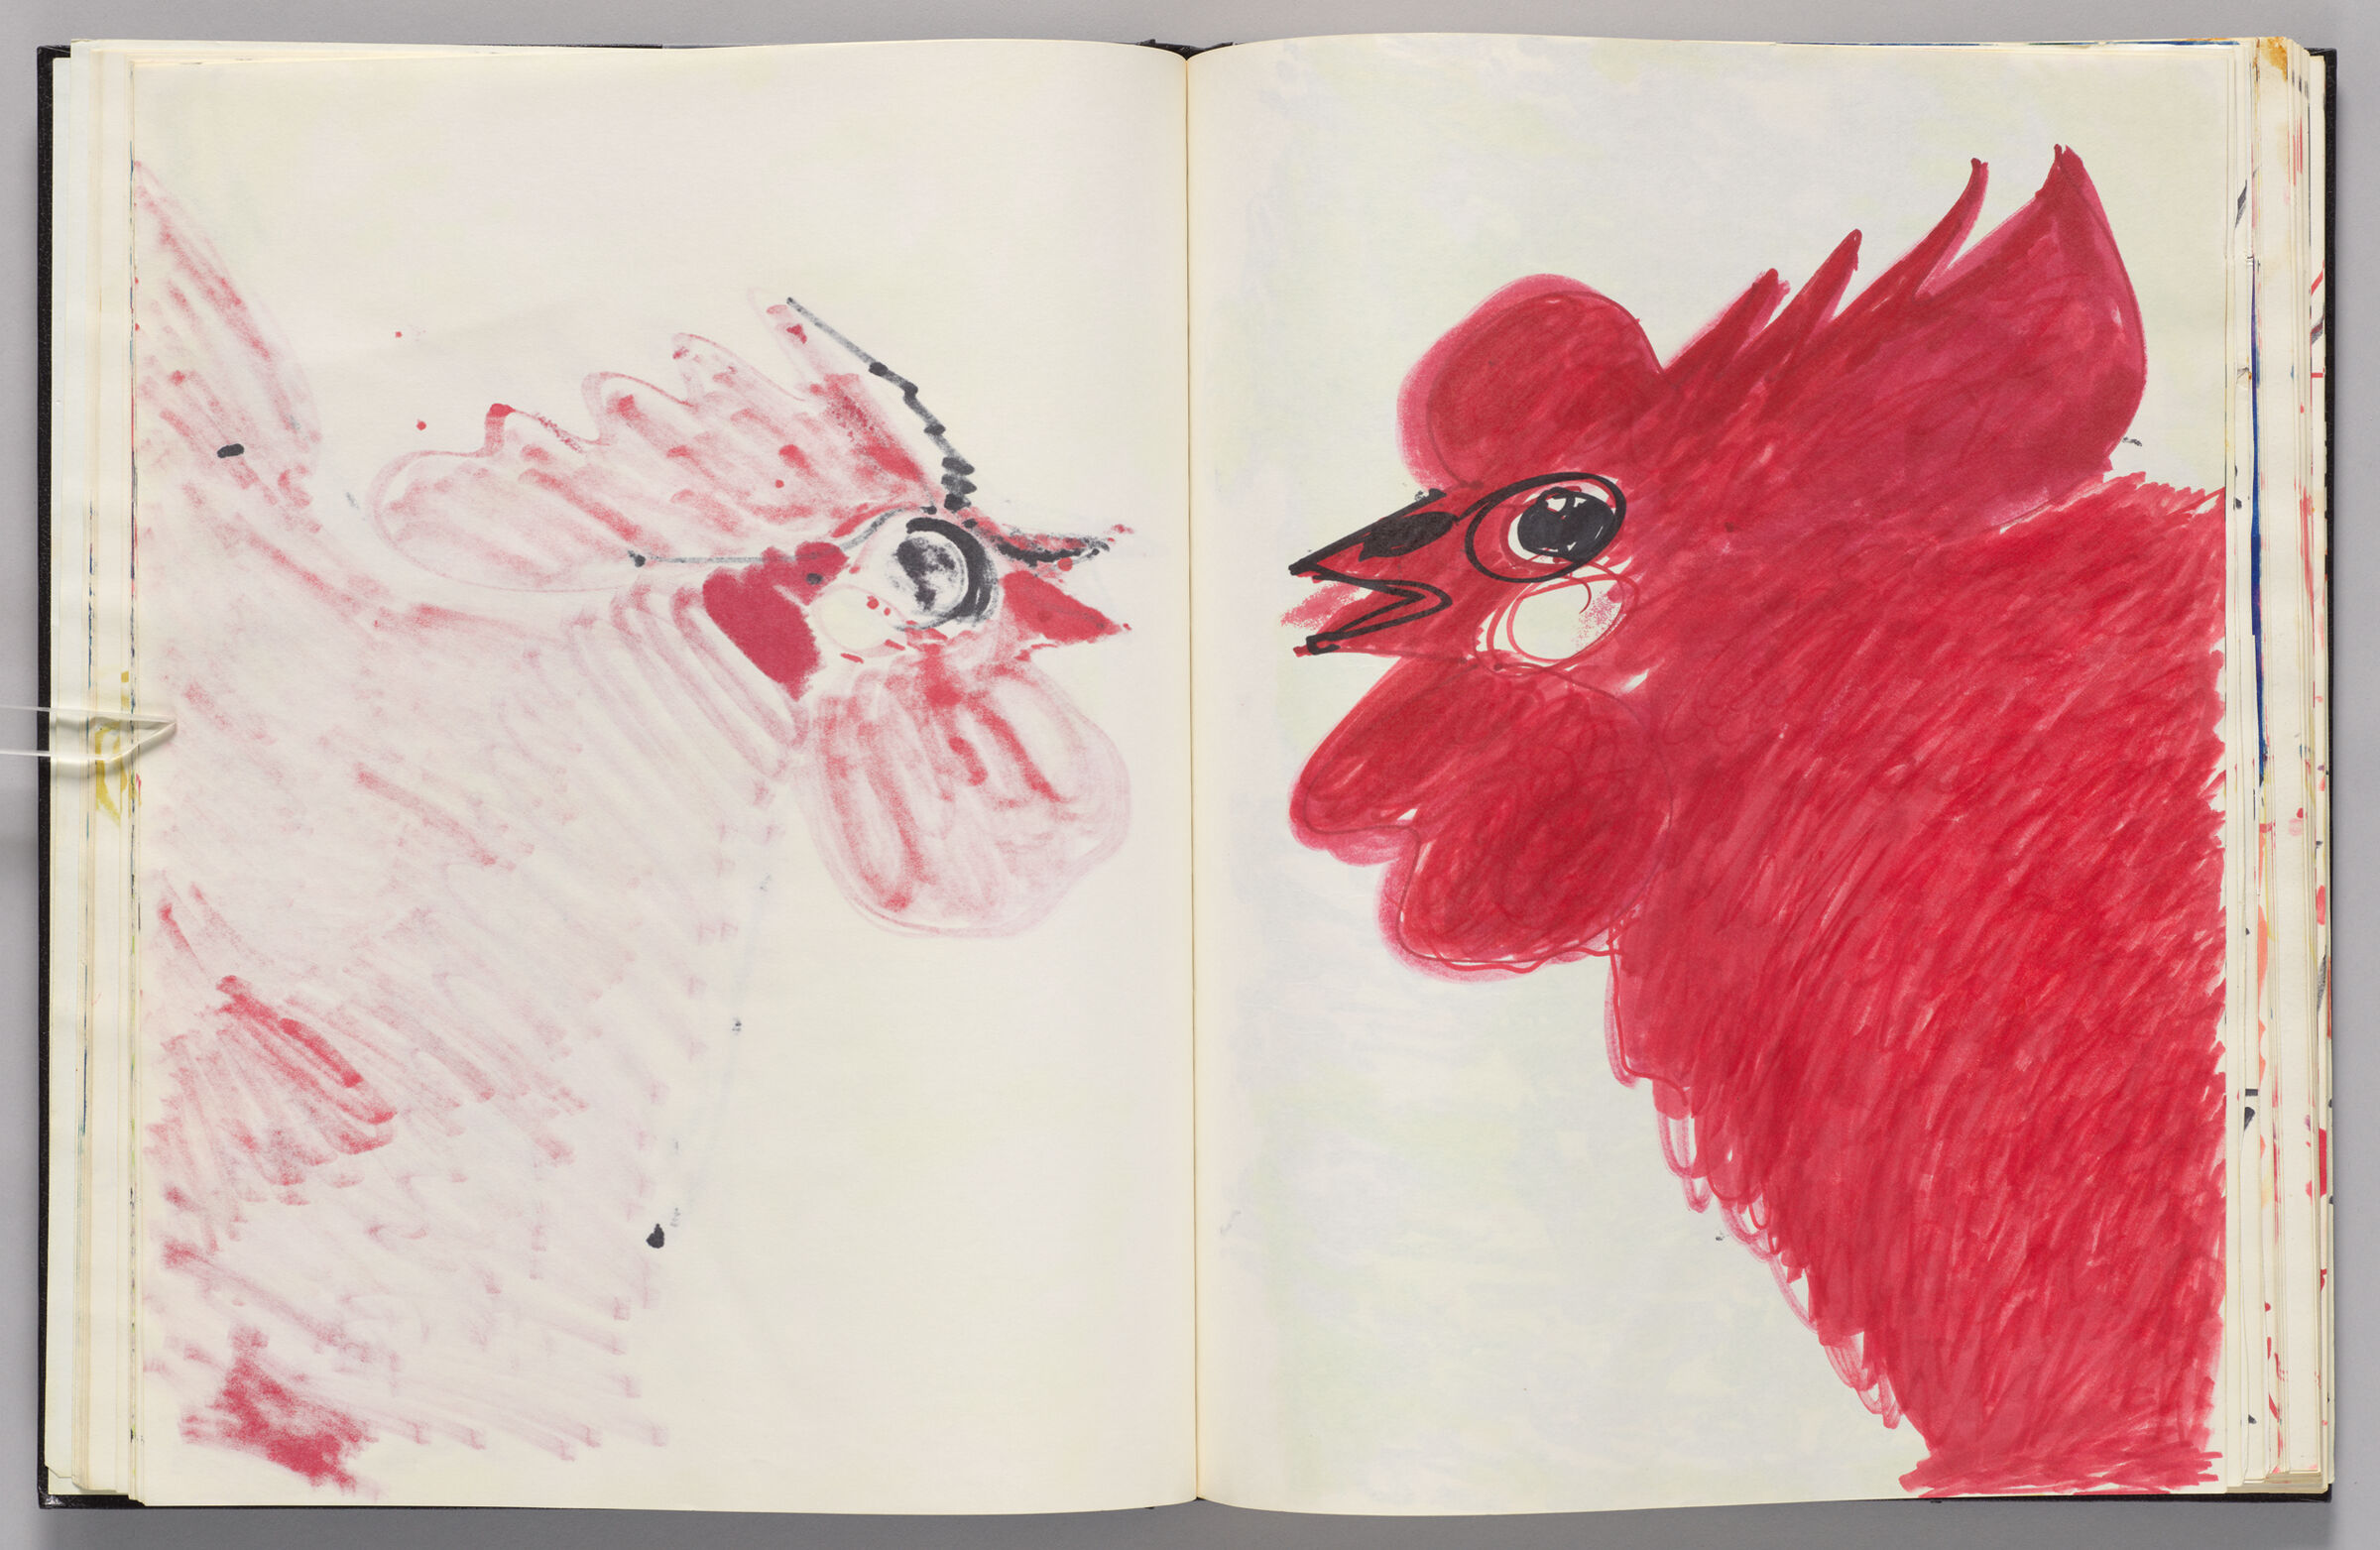 Untitled (Bleed-Through Of Previous Page, Left Page); Untitled (Rooster In Red With Eye And Beak In Black, Right Page)